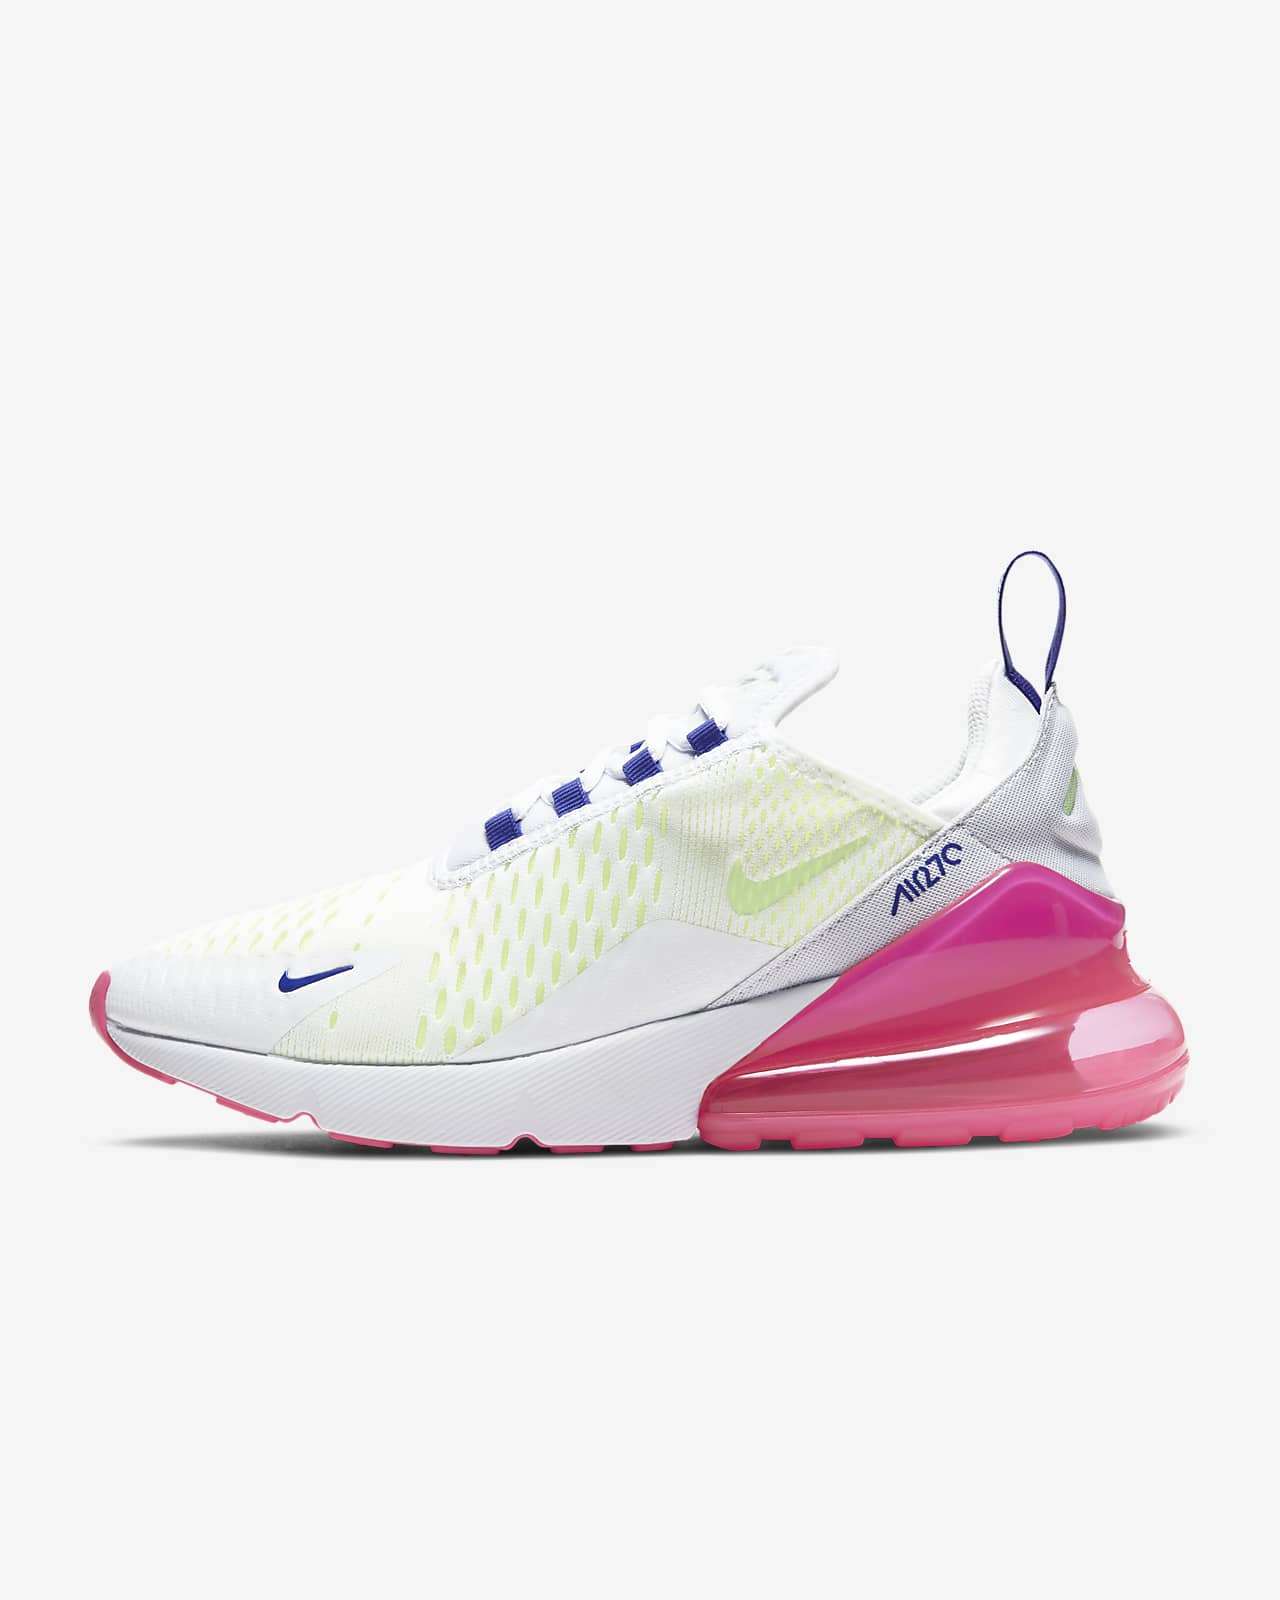 nike 270 white and pink womens